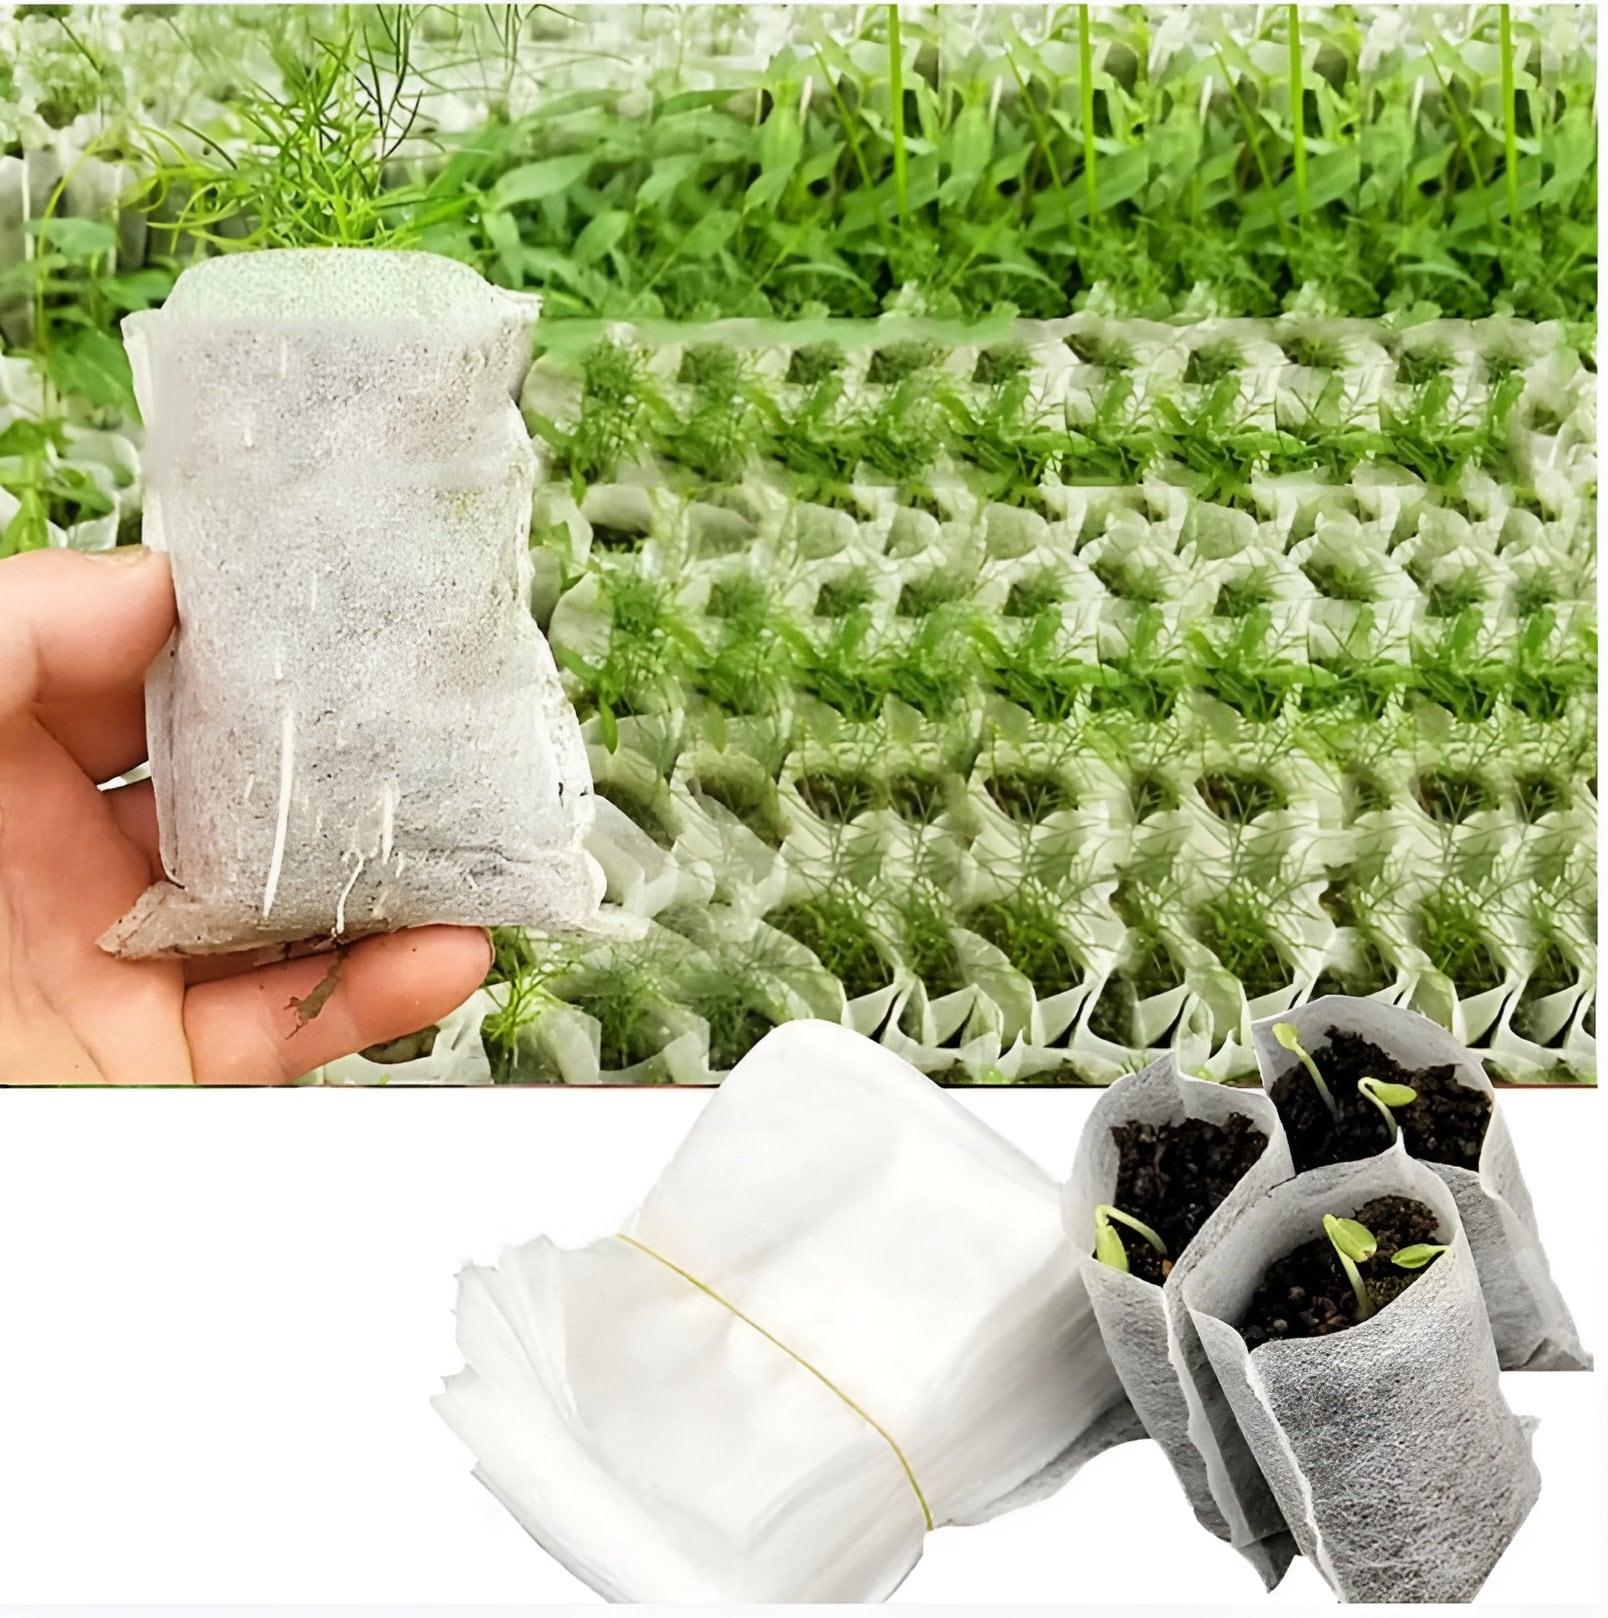 Belit Nursery Growing Bags, 100 Pcs Fabric Seedling Pots Non-Woven Pouch  for Gardening Seed Plant Bag, Potato, Flower, Tomato Plant Starts (5.7 x  5.7